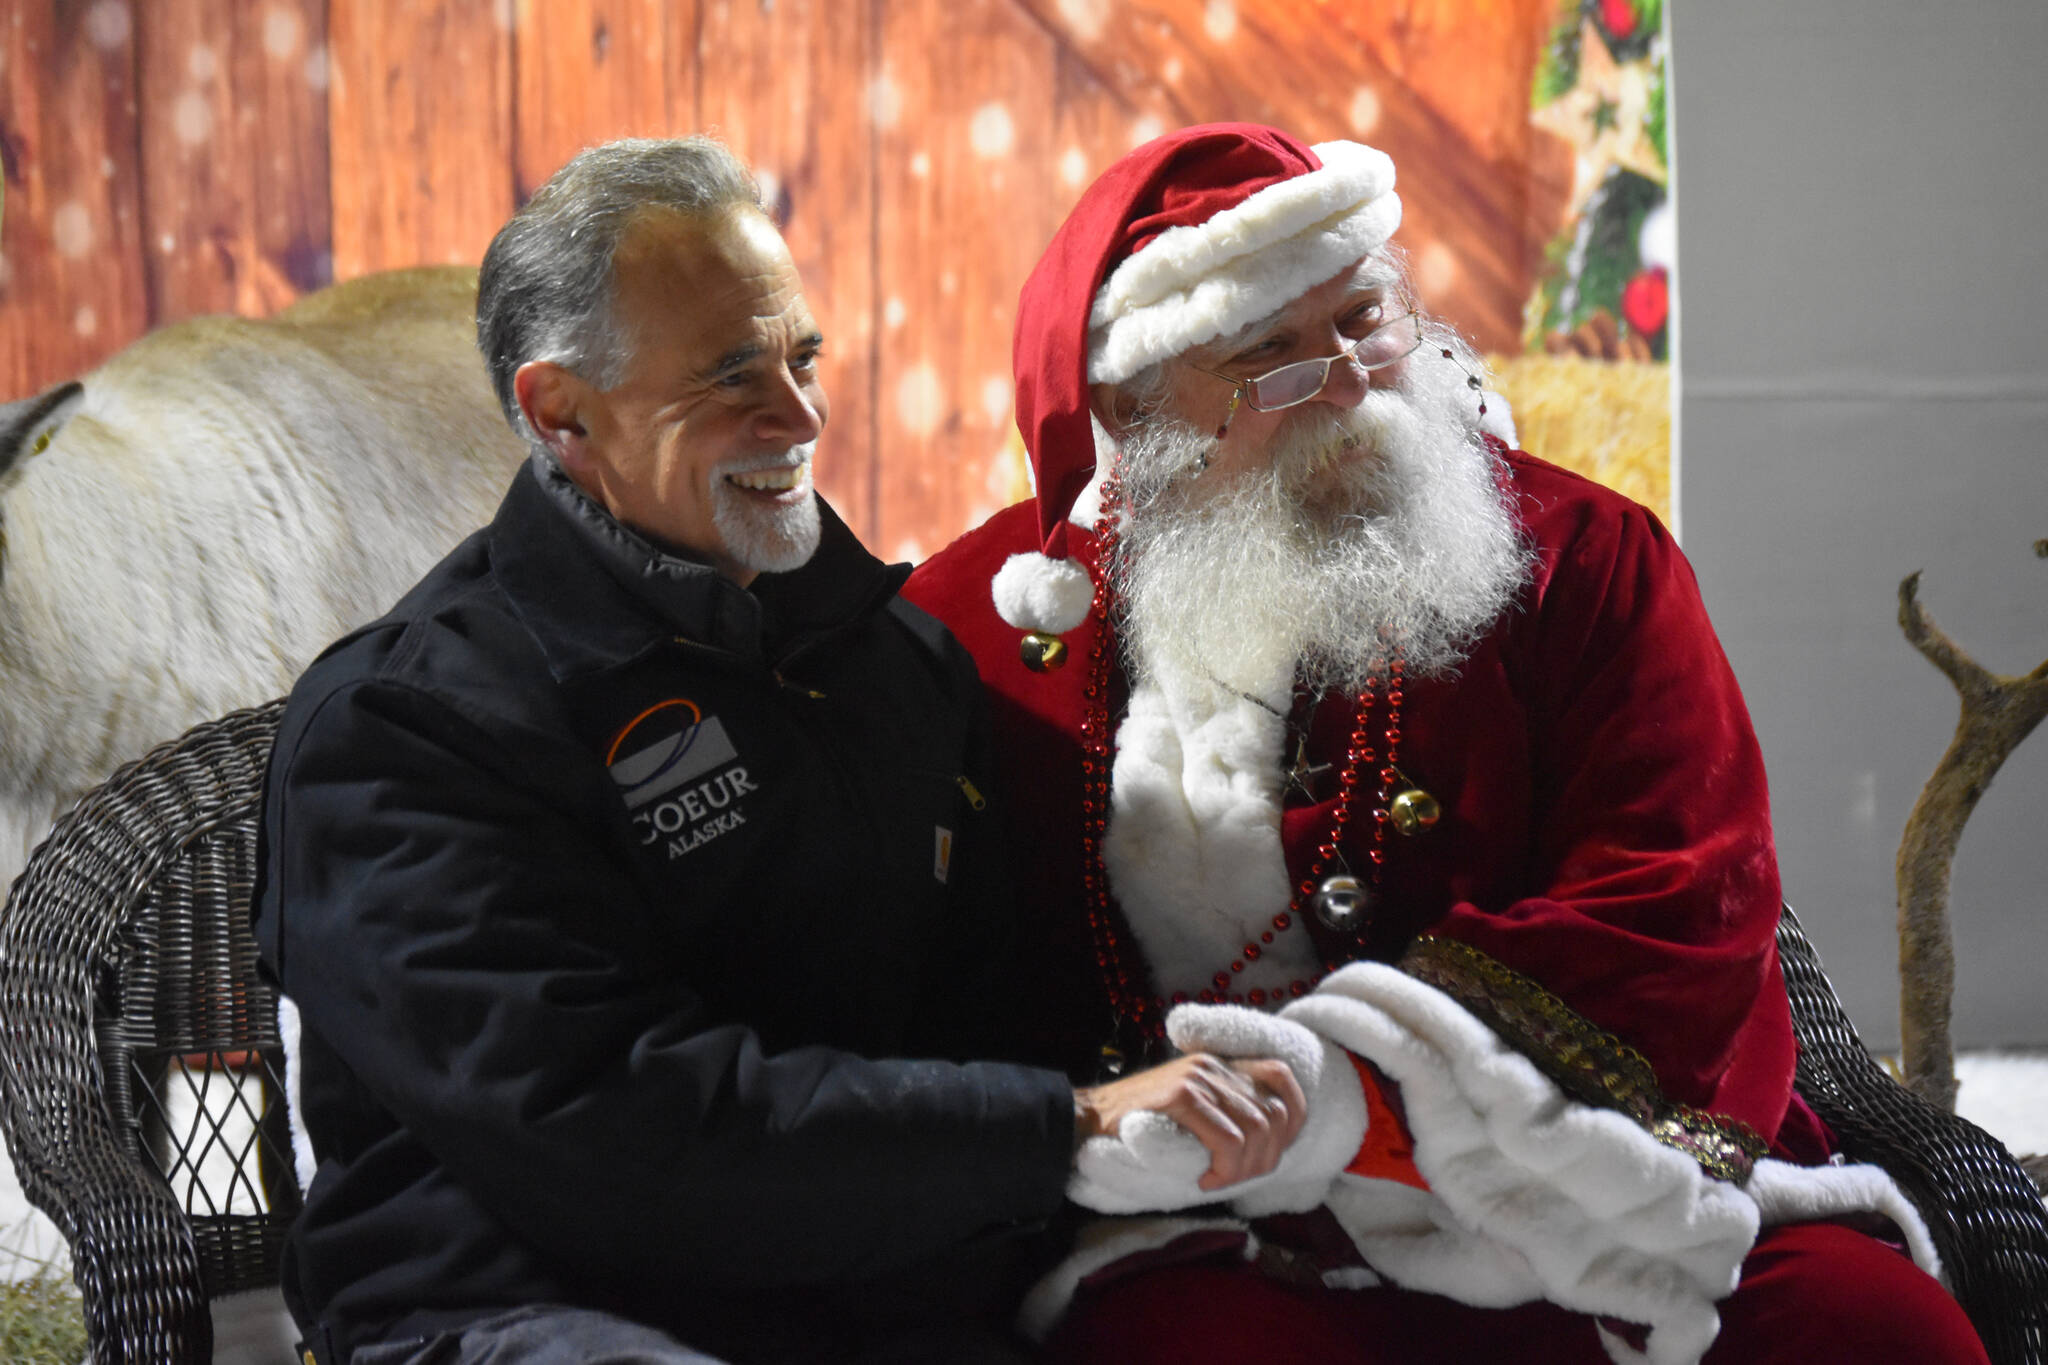 State Sen. Peter Micciche and Santa Claus sit together during Christmas in the Park festivities on Saturday, Dec. 3, 2022, at Soldotna Creek Park in Soldotna, Alaska. (Jake Dye/Peninsula Clarion)